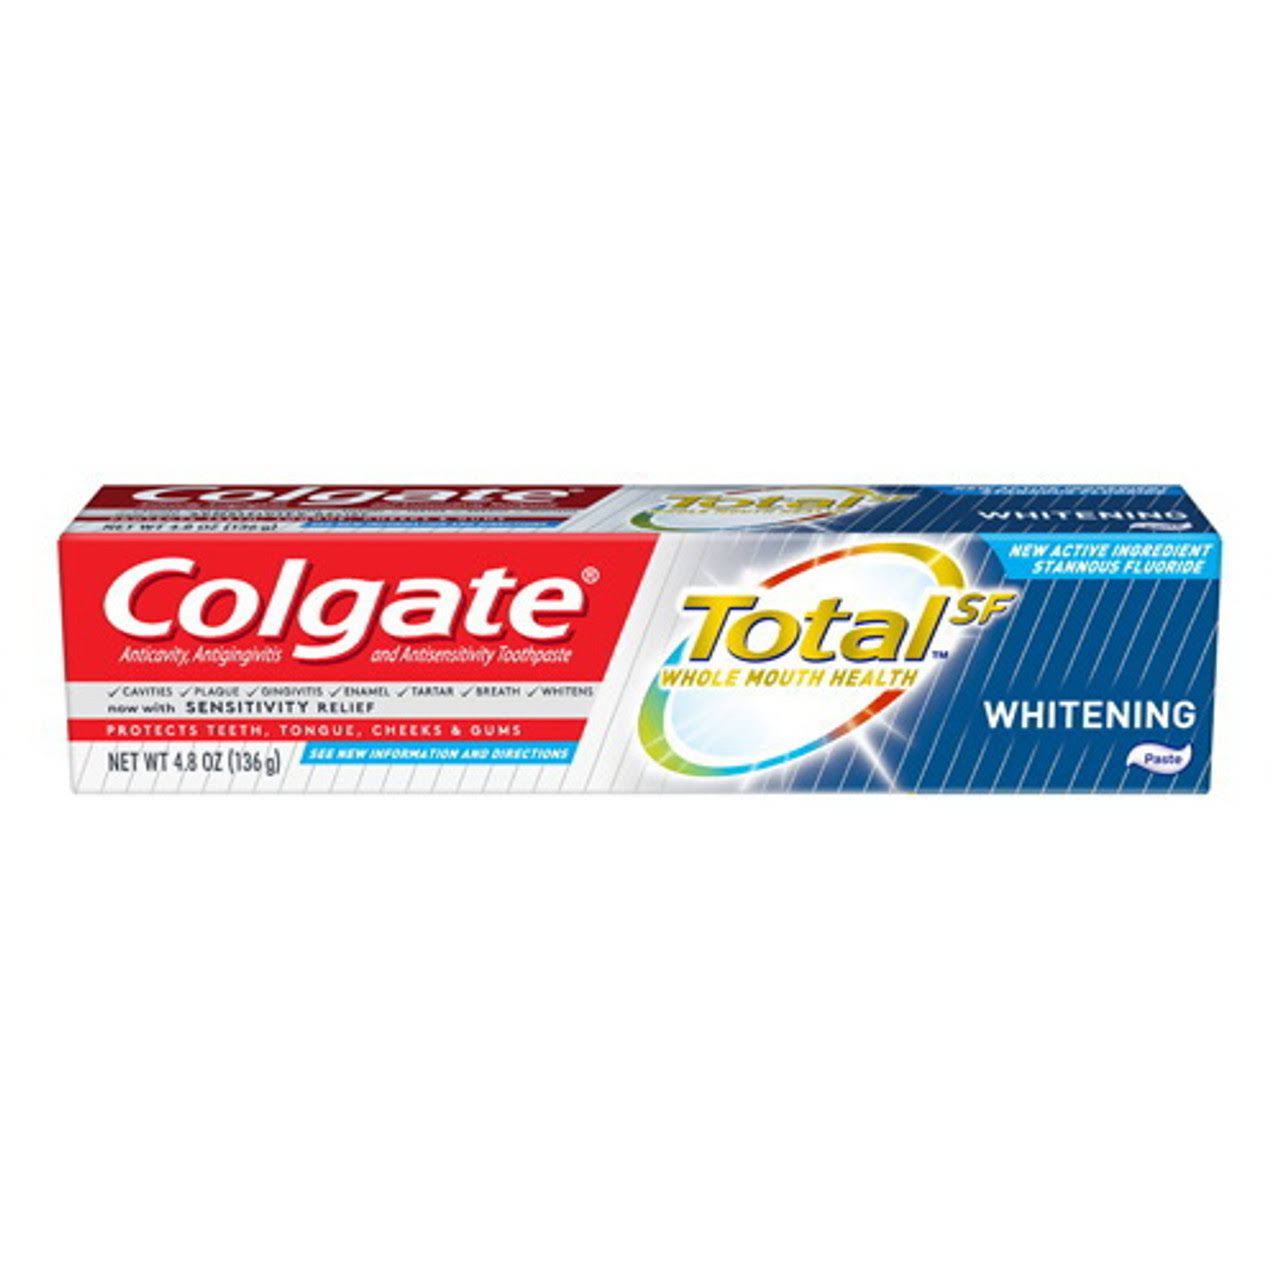 Colgate Total Whitening Toothpaste, 4.8 Ounce